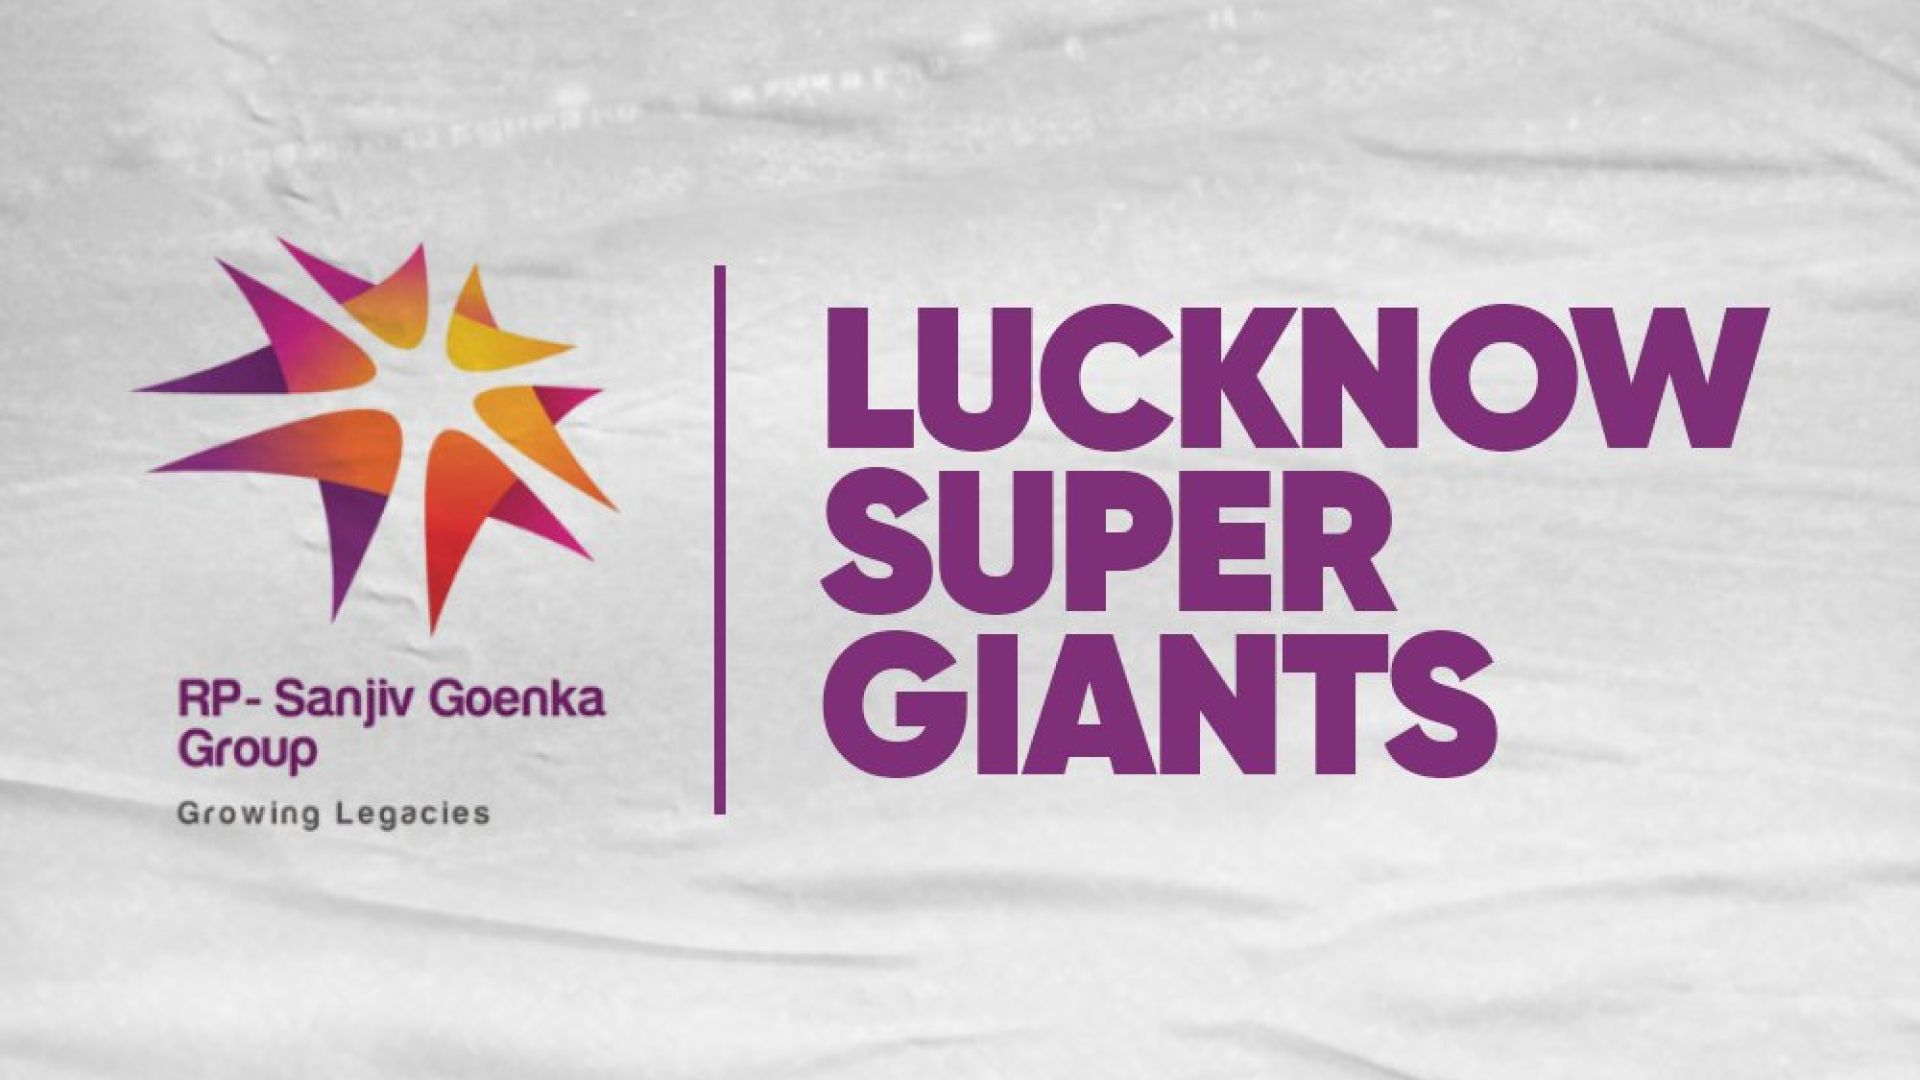 Lucknow franchise takes the name of owner’s previous IPL team, call themselves Lucknow Super Giants